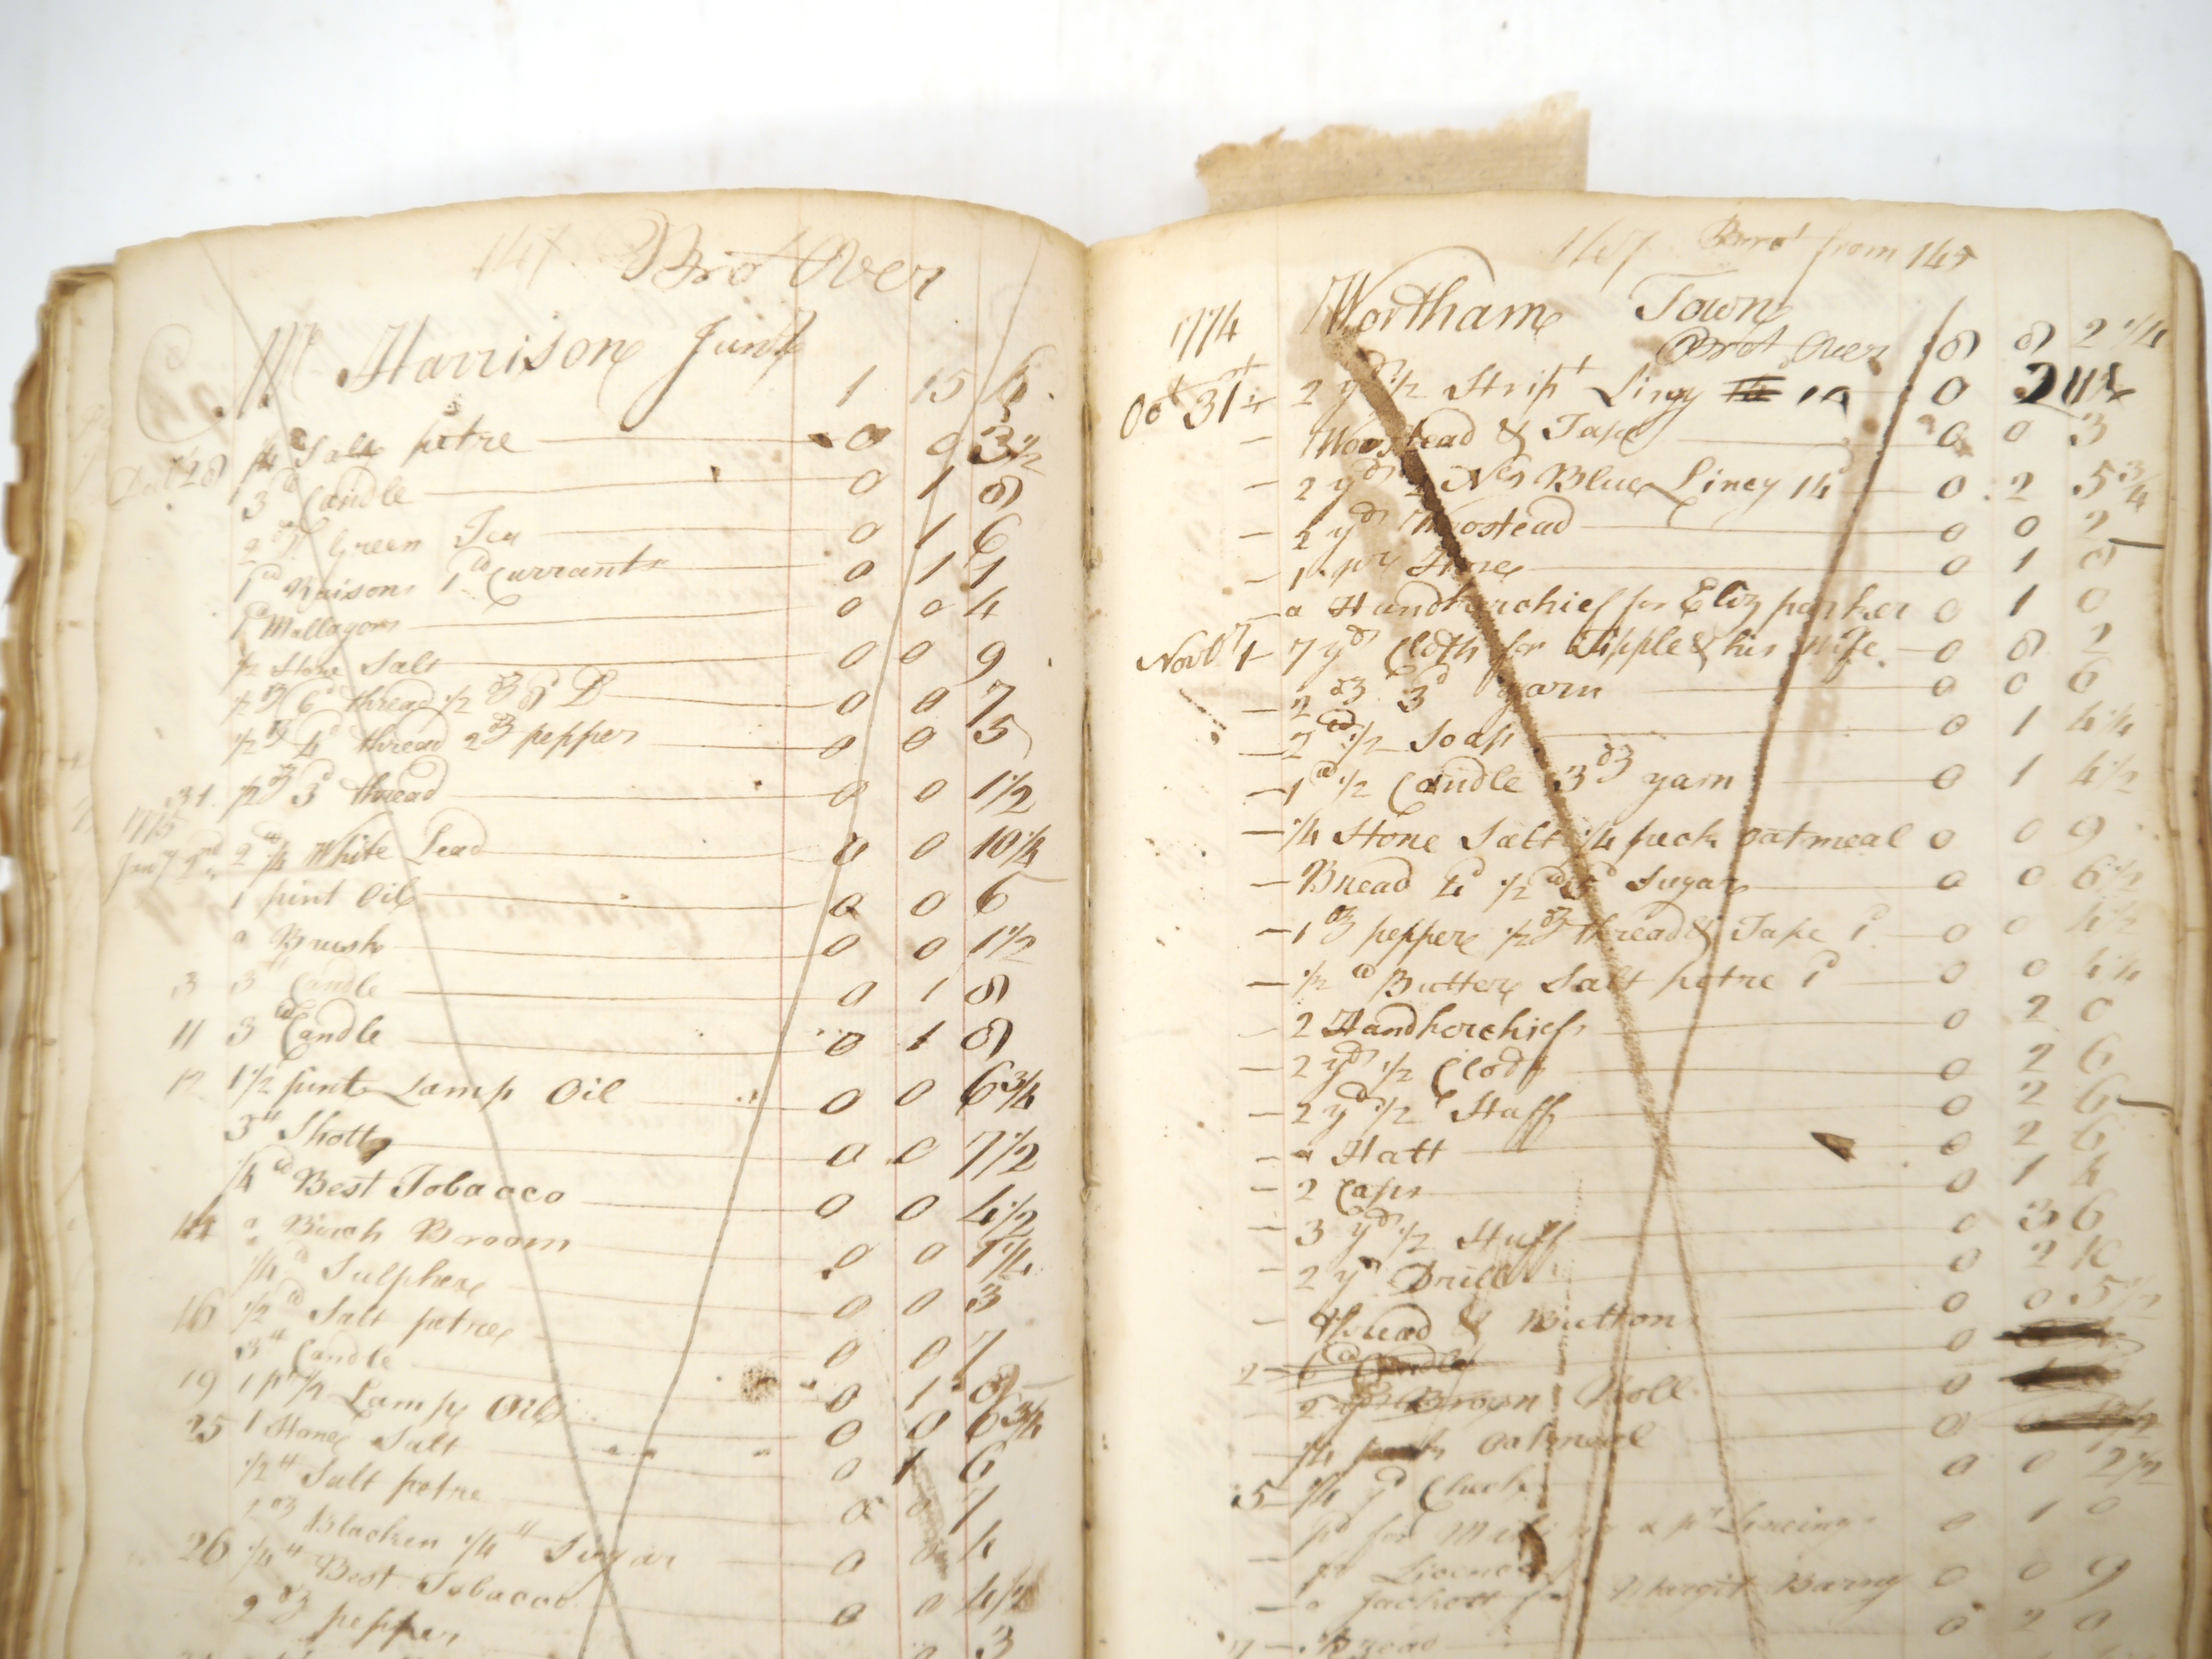 (Suffolk, Wortham.) [Ambrose Wretts.] A large manuscript account book, compiled 1772-1780 in the - Image 6 of 15